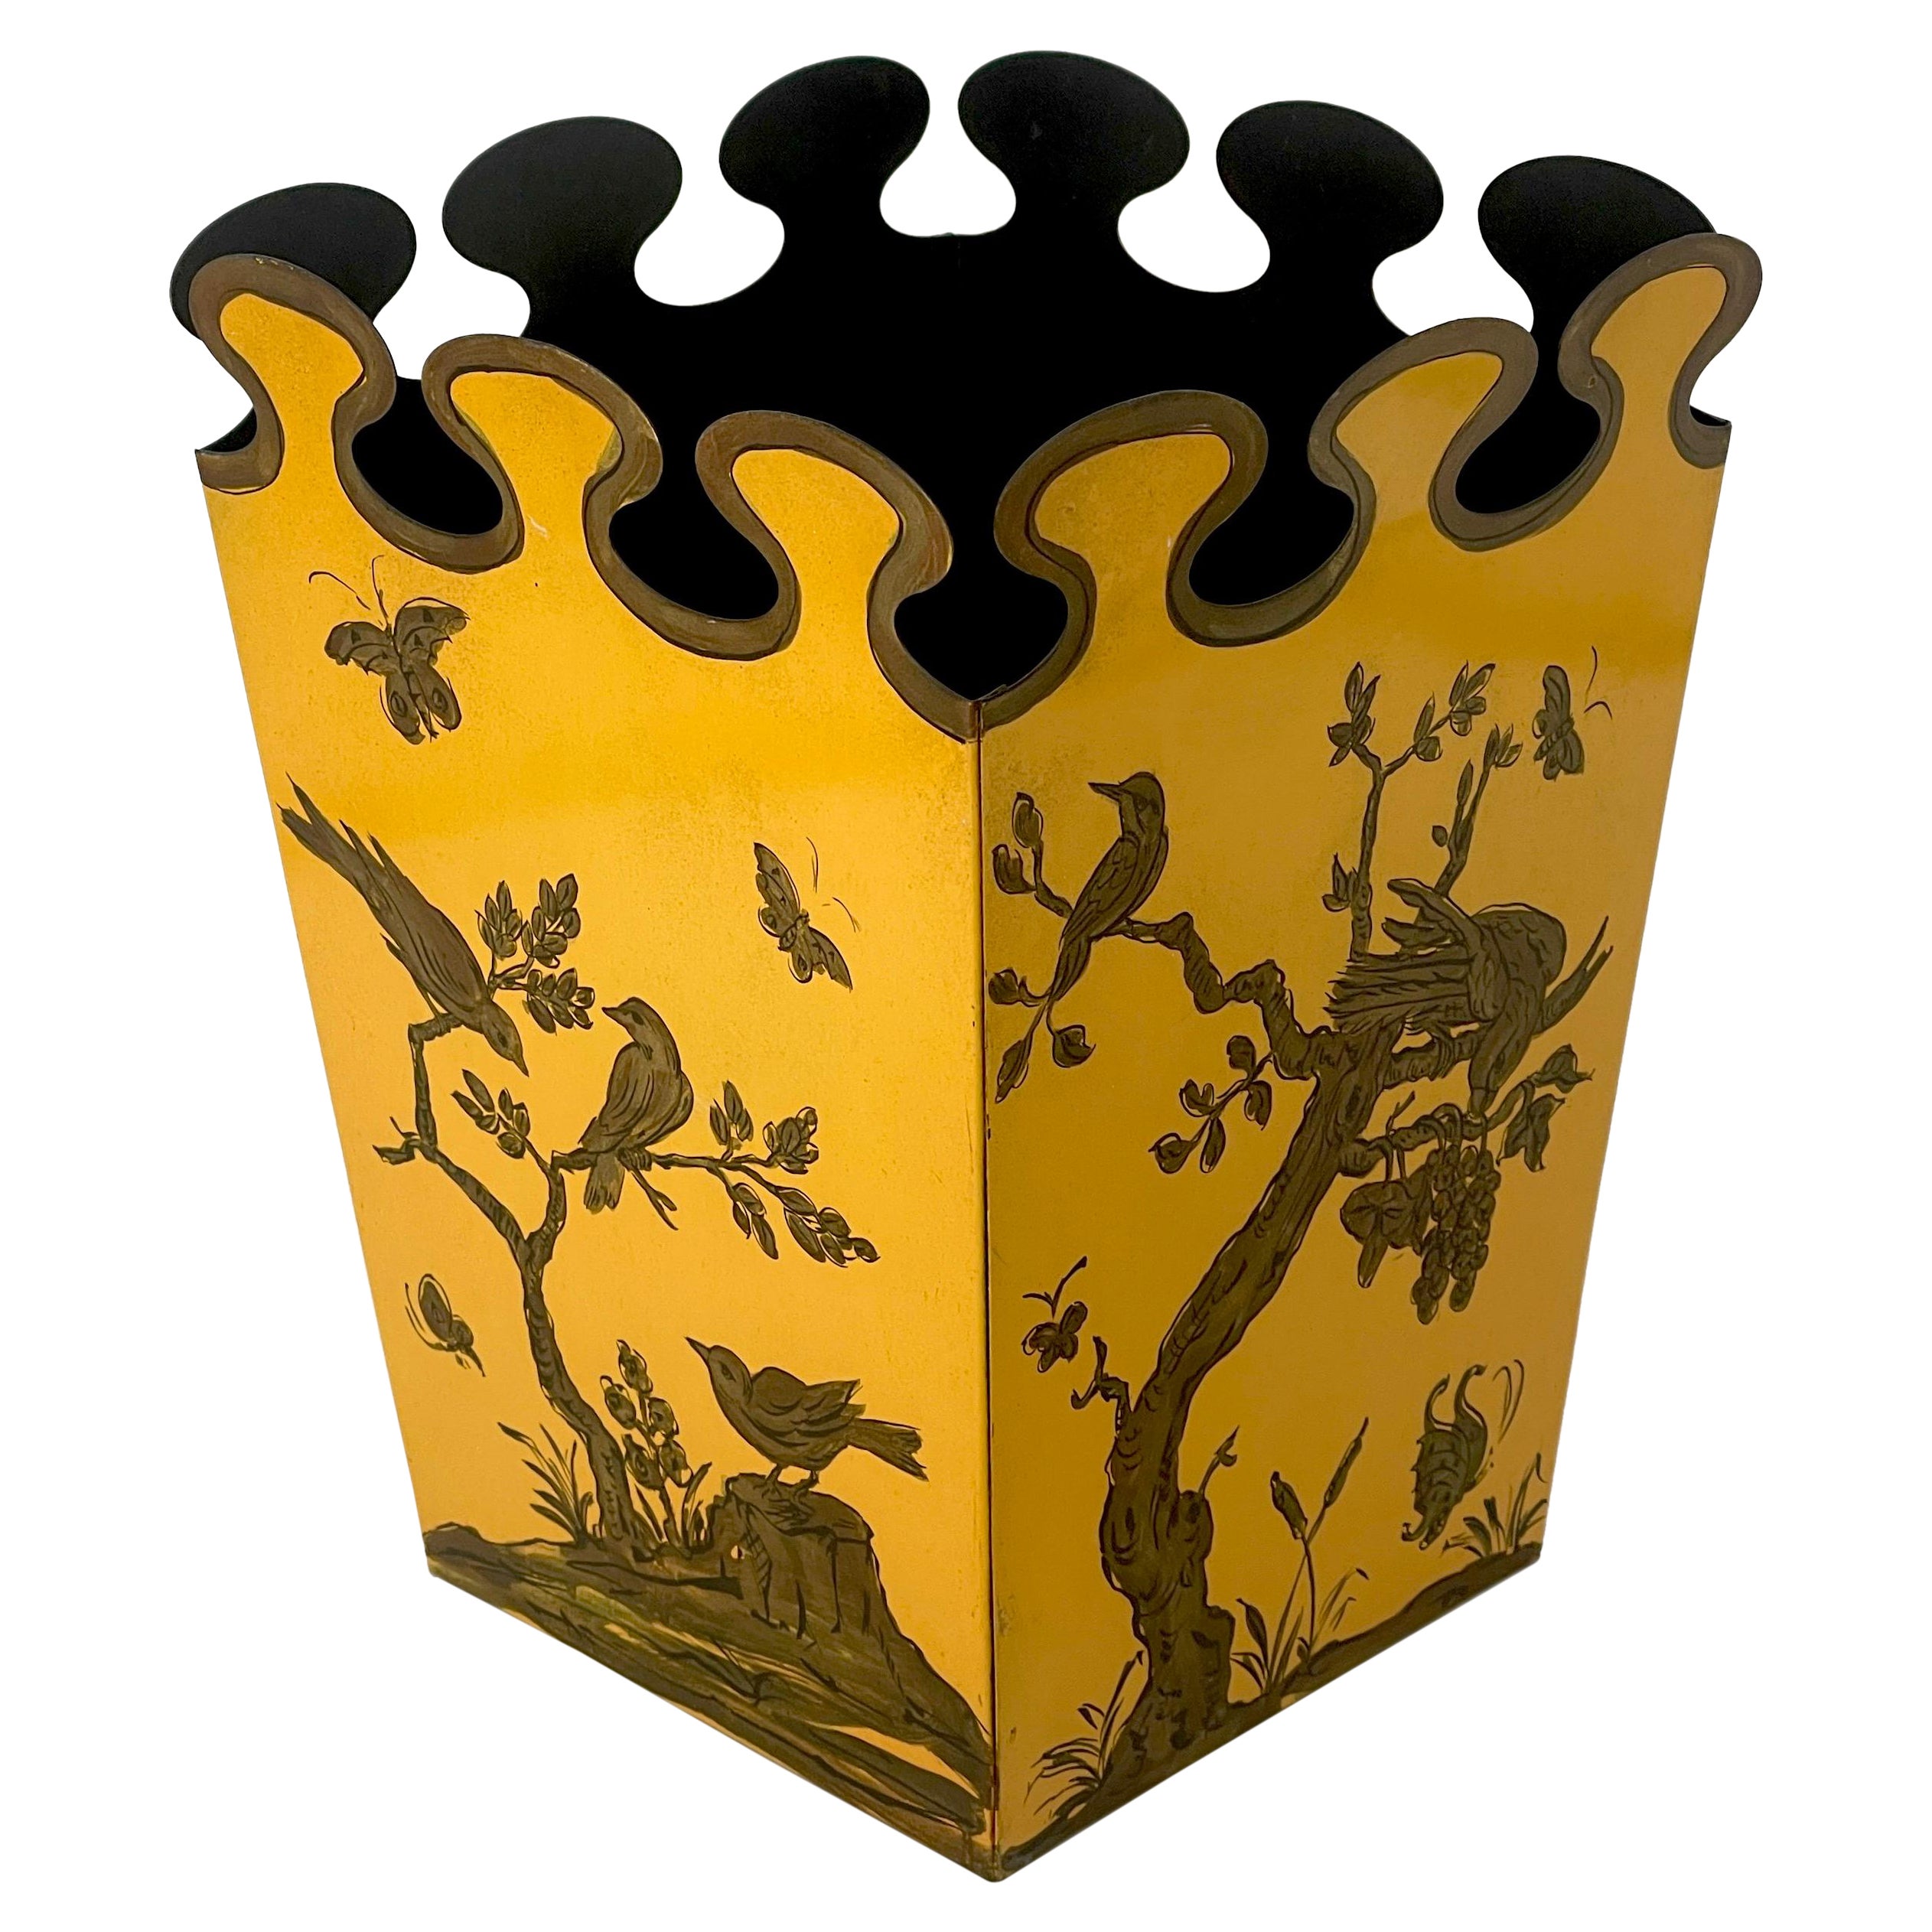 Exotic Chinoiserie Tole Wastepaper Basket/ Trash Can by Cufler & Hughes, London 